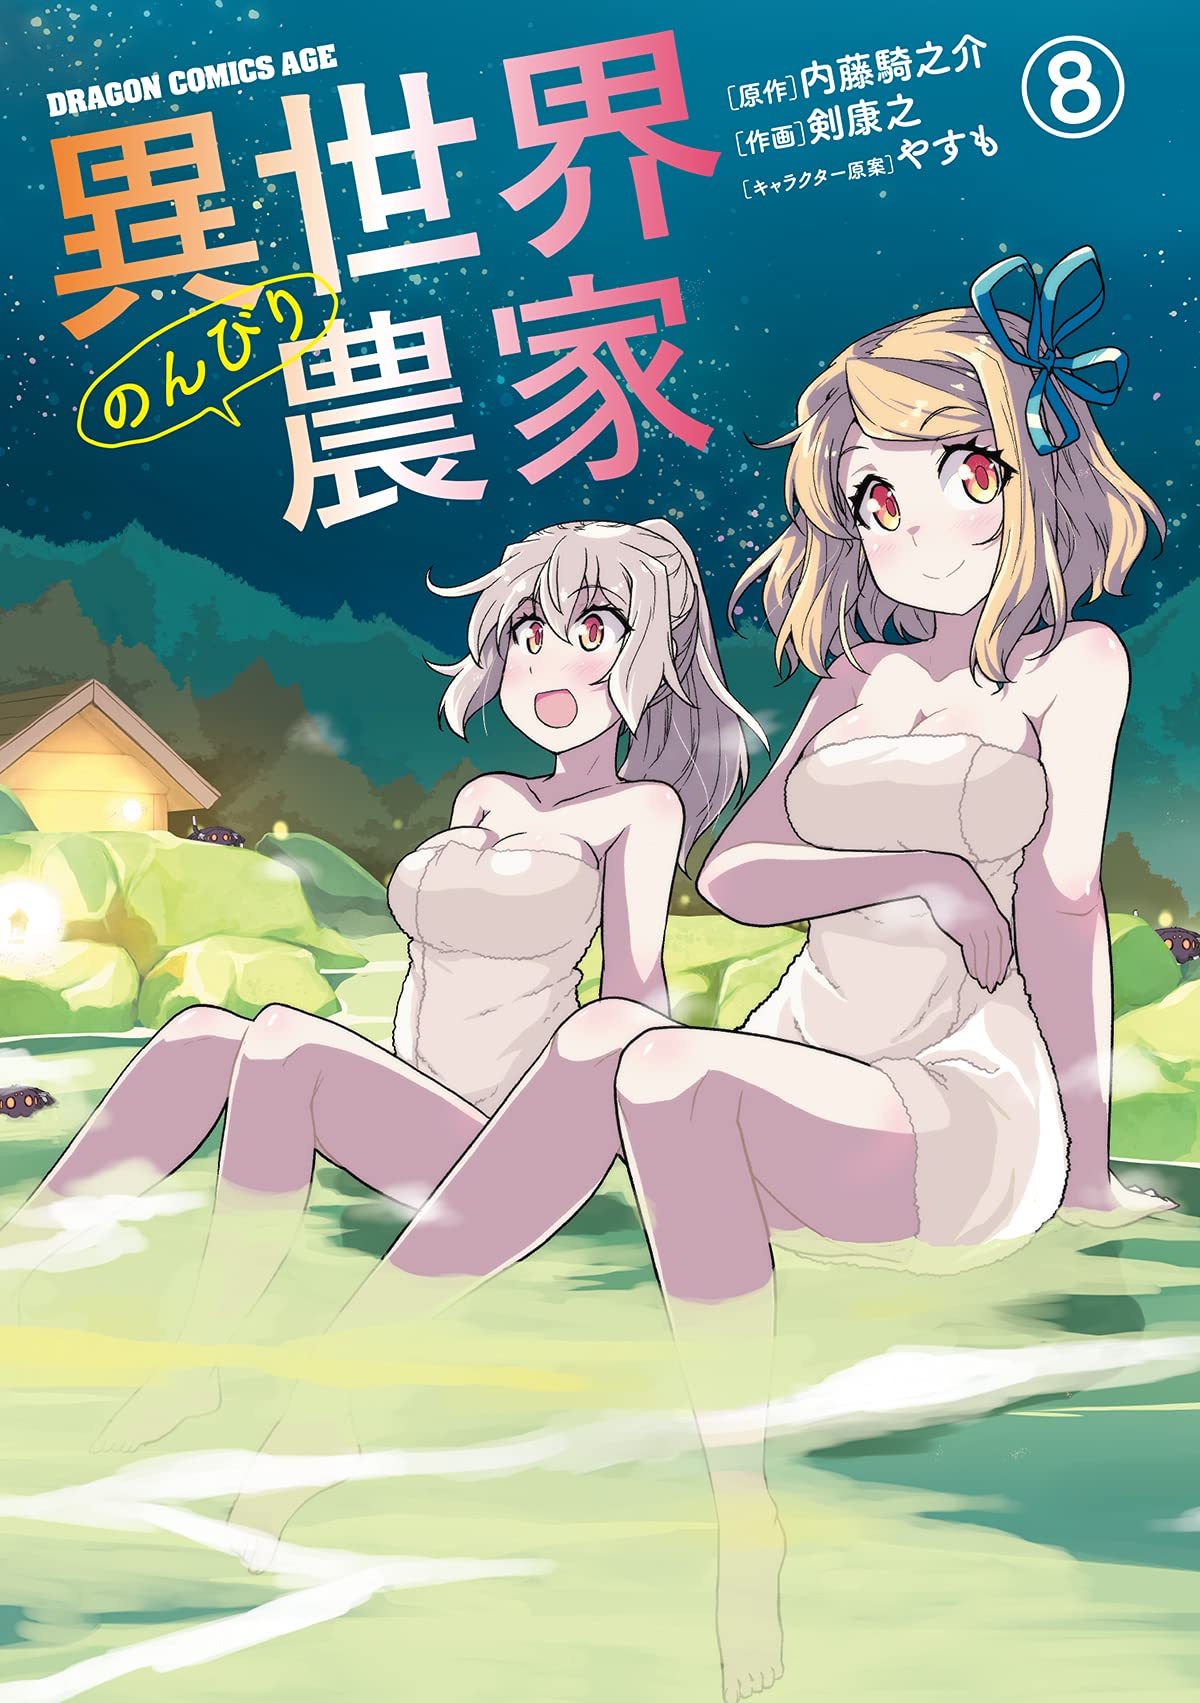 Isekai Nonbiri Nouka • Farming Life in Another World - Episode 8 discussion  : r/anime